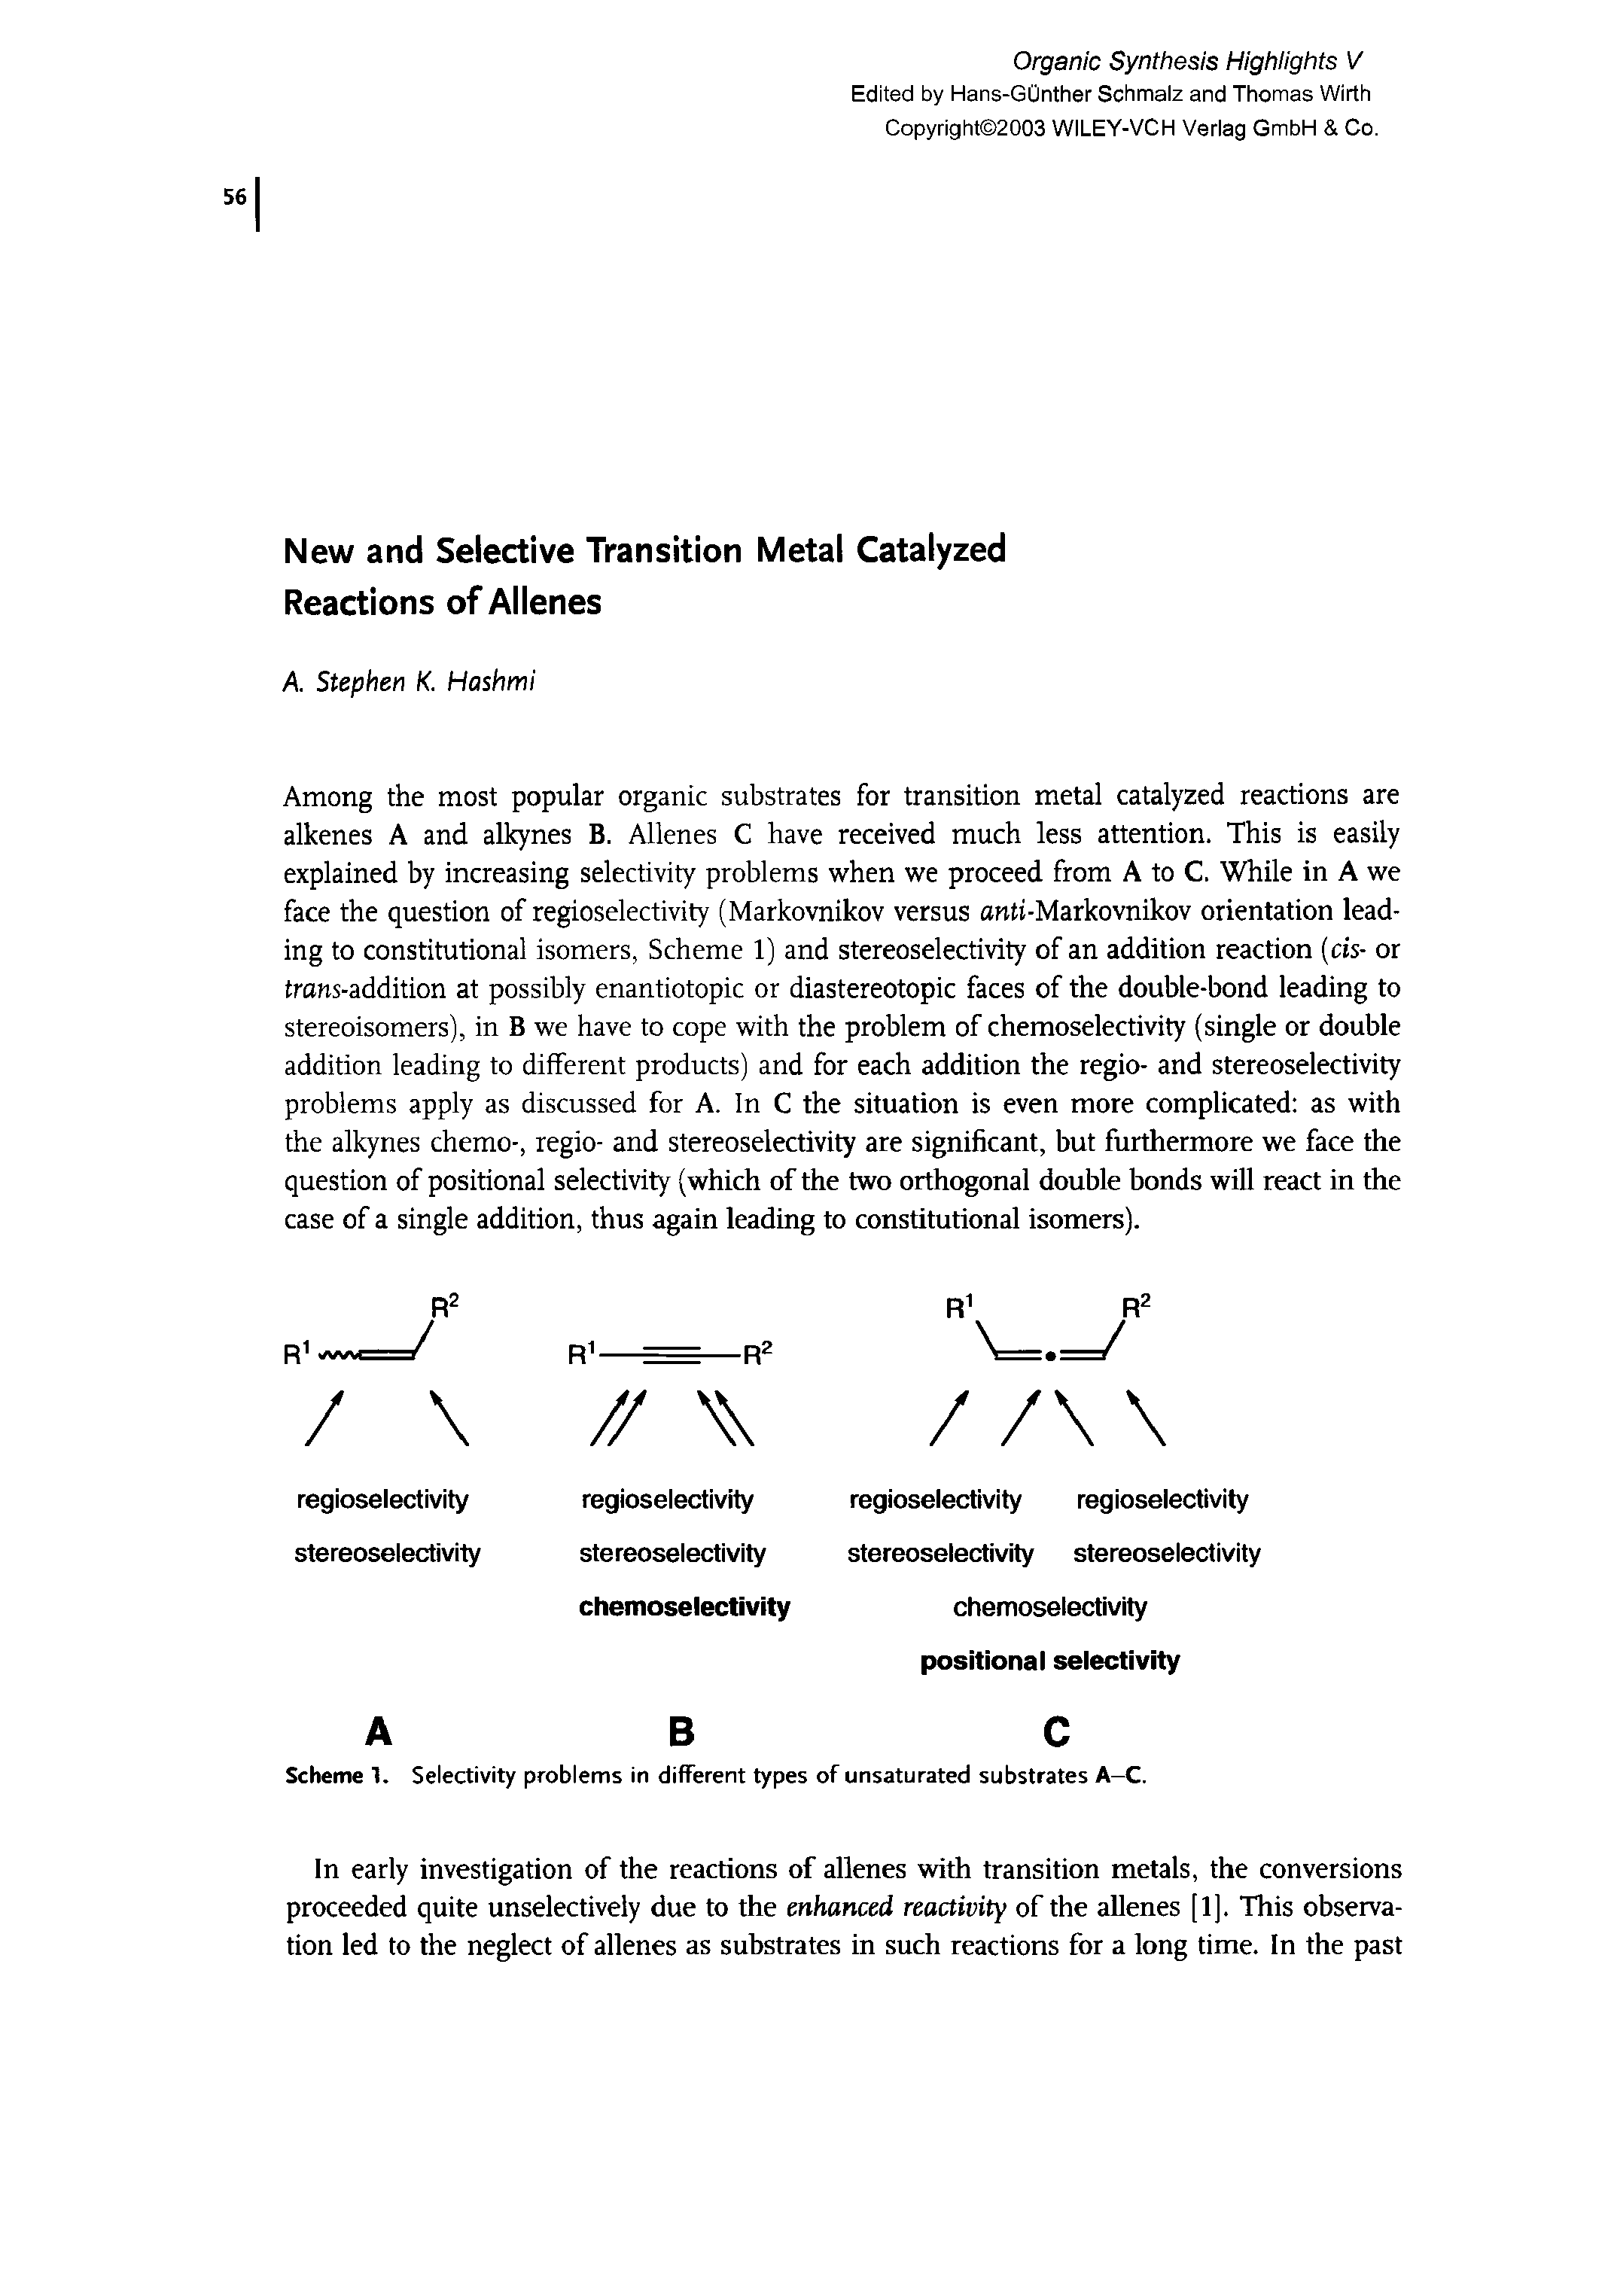 Scheme 1. Selectivity problems in different types of unsaturated substrates A-C.